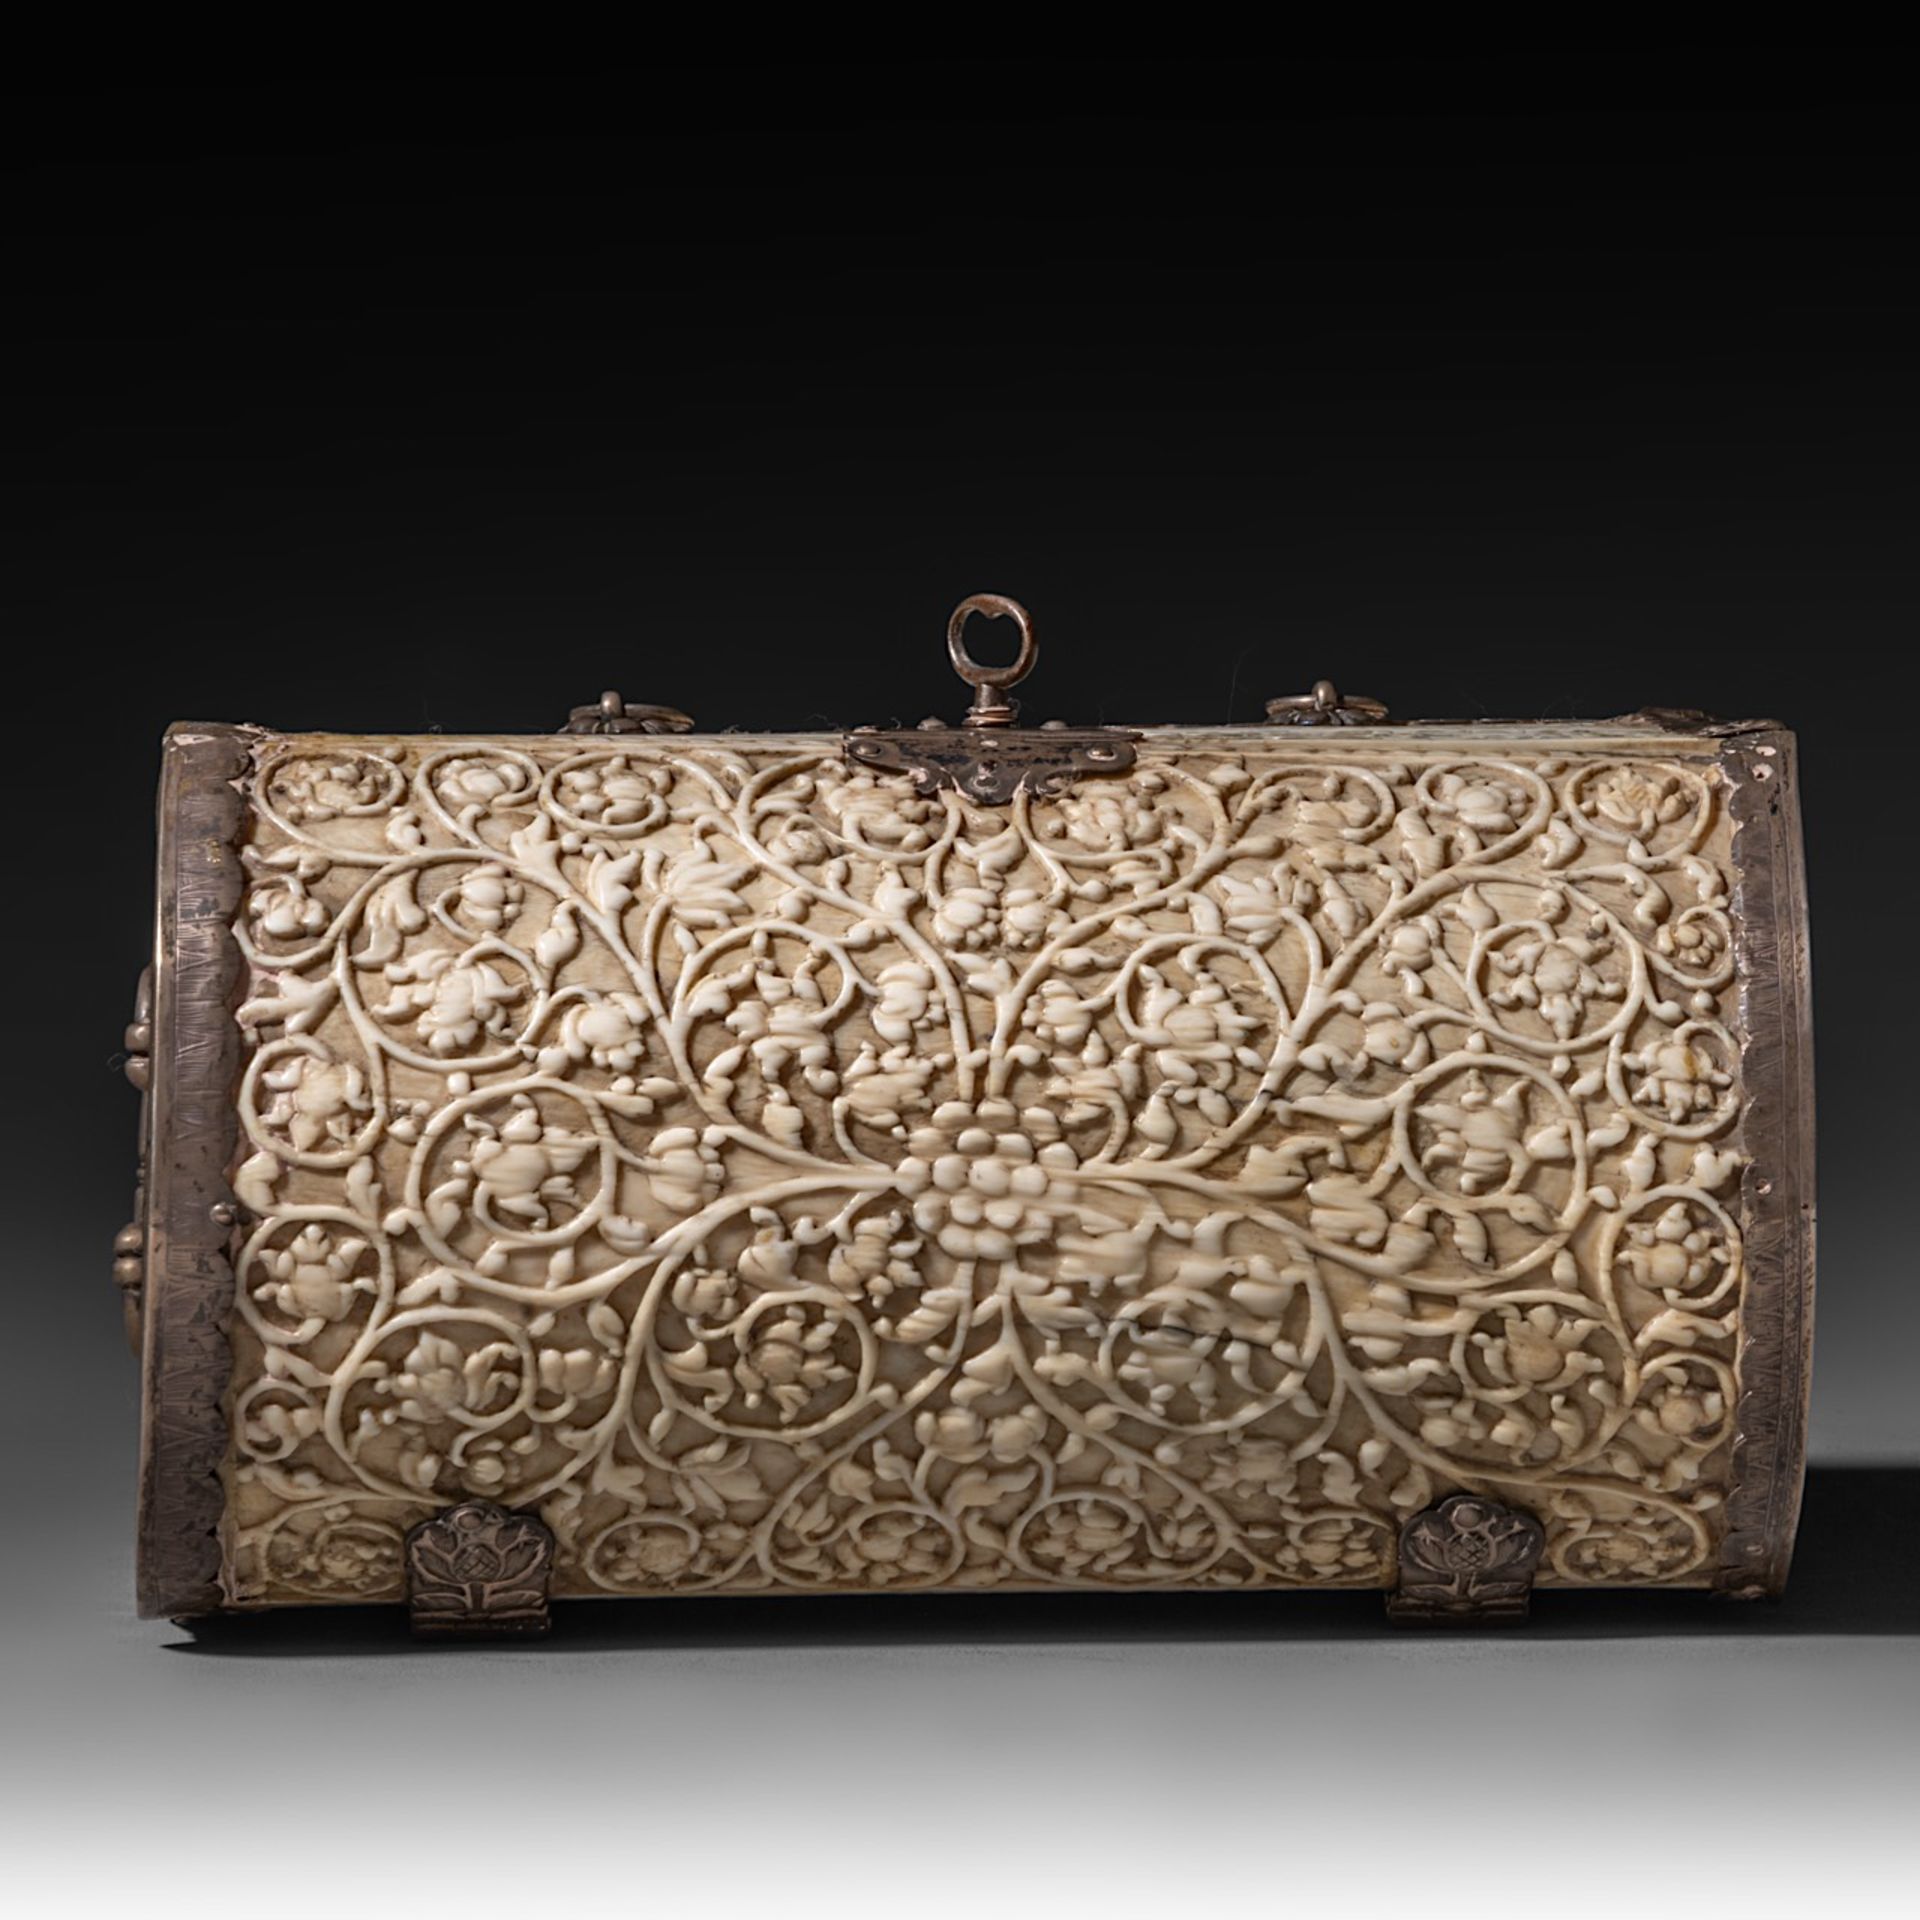 A 17th/18th-century Sinhalese (Sri Lanka) ivory jewelry casket, H 13,5 - W 19,3 - D 10,1 cm / total - Image 7 of 11